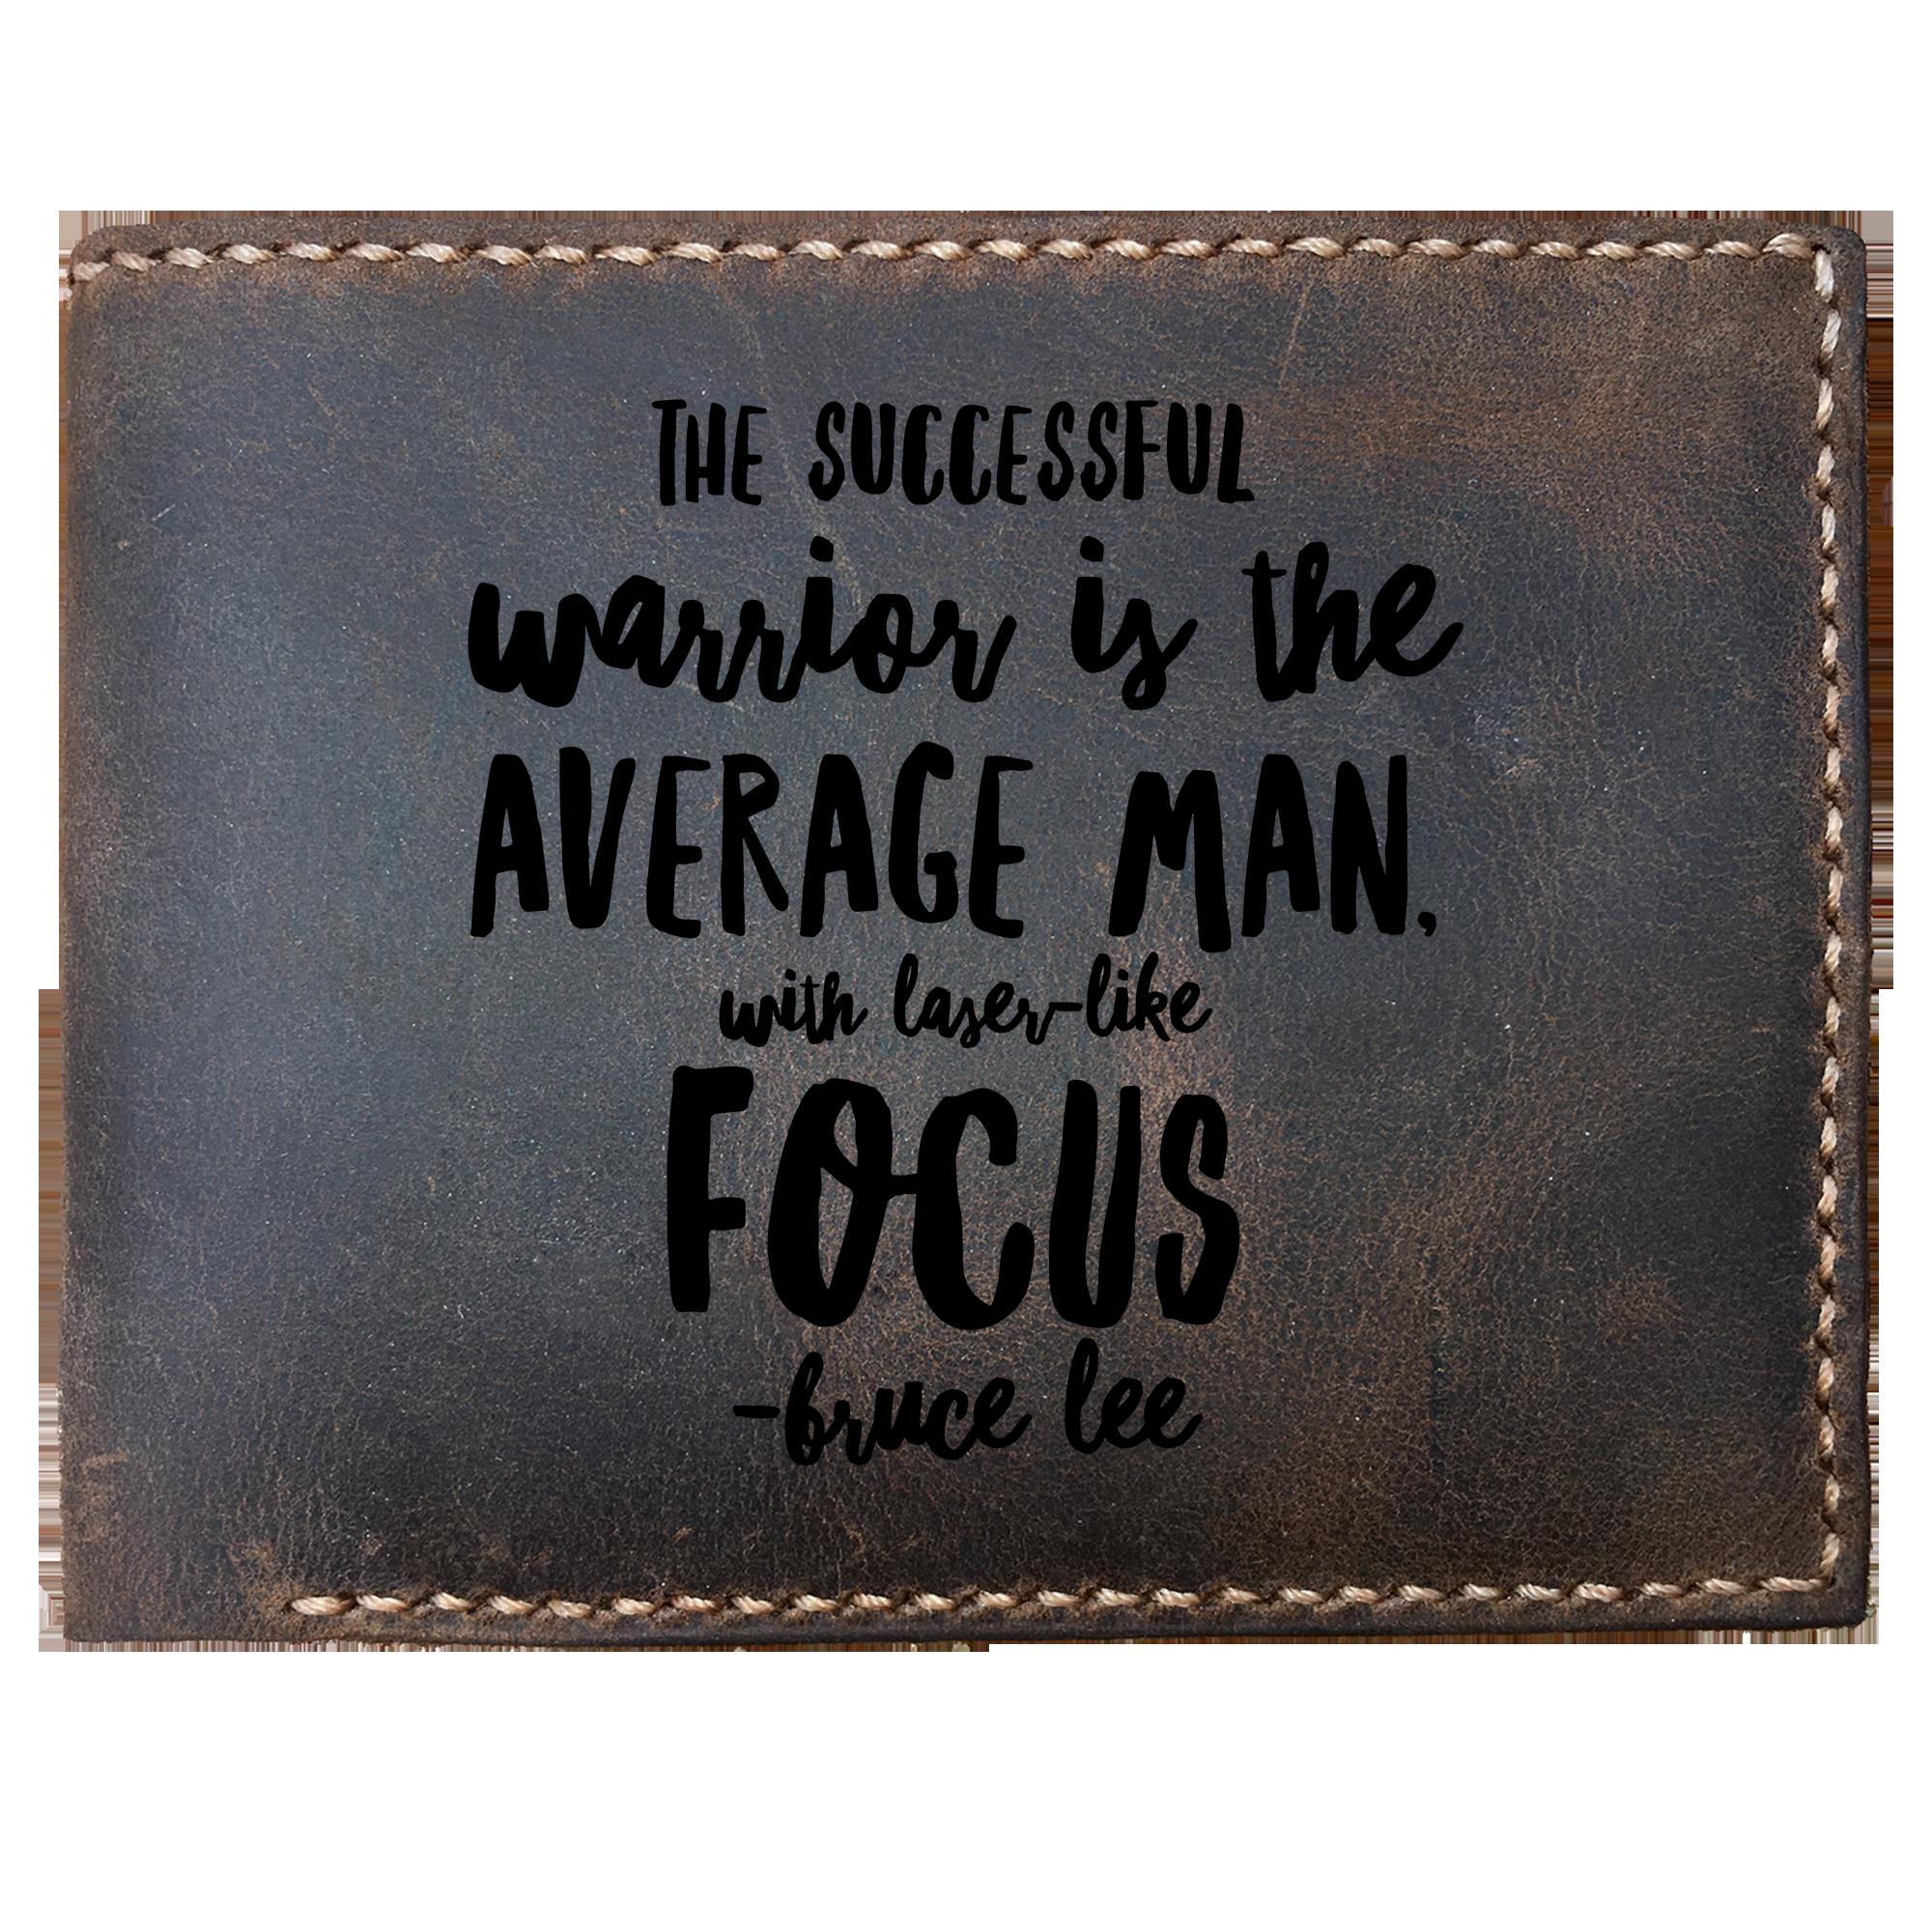 Skitongifts Funny Custom Laser Engraved Bifold Leather Wallet For Men, Bruce Lee Quote The Successful Warrior Is The Average Man